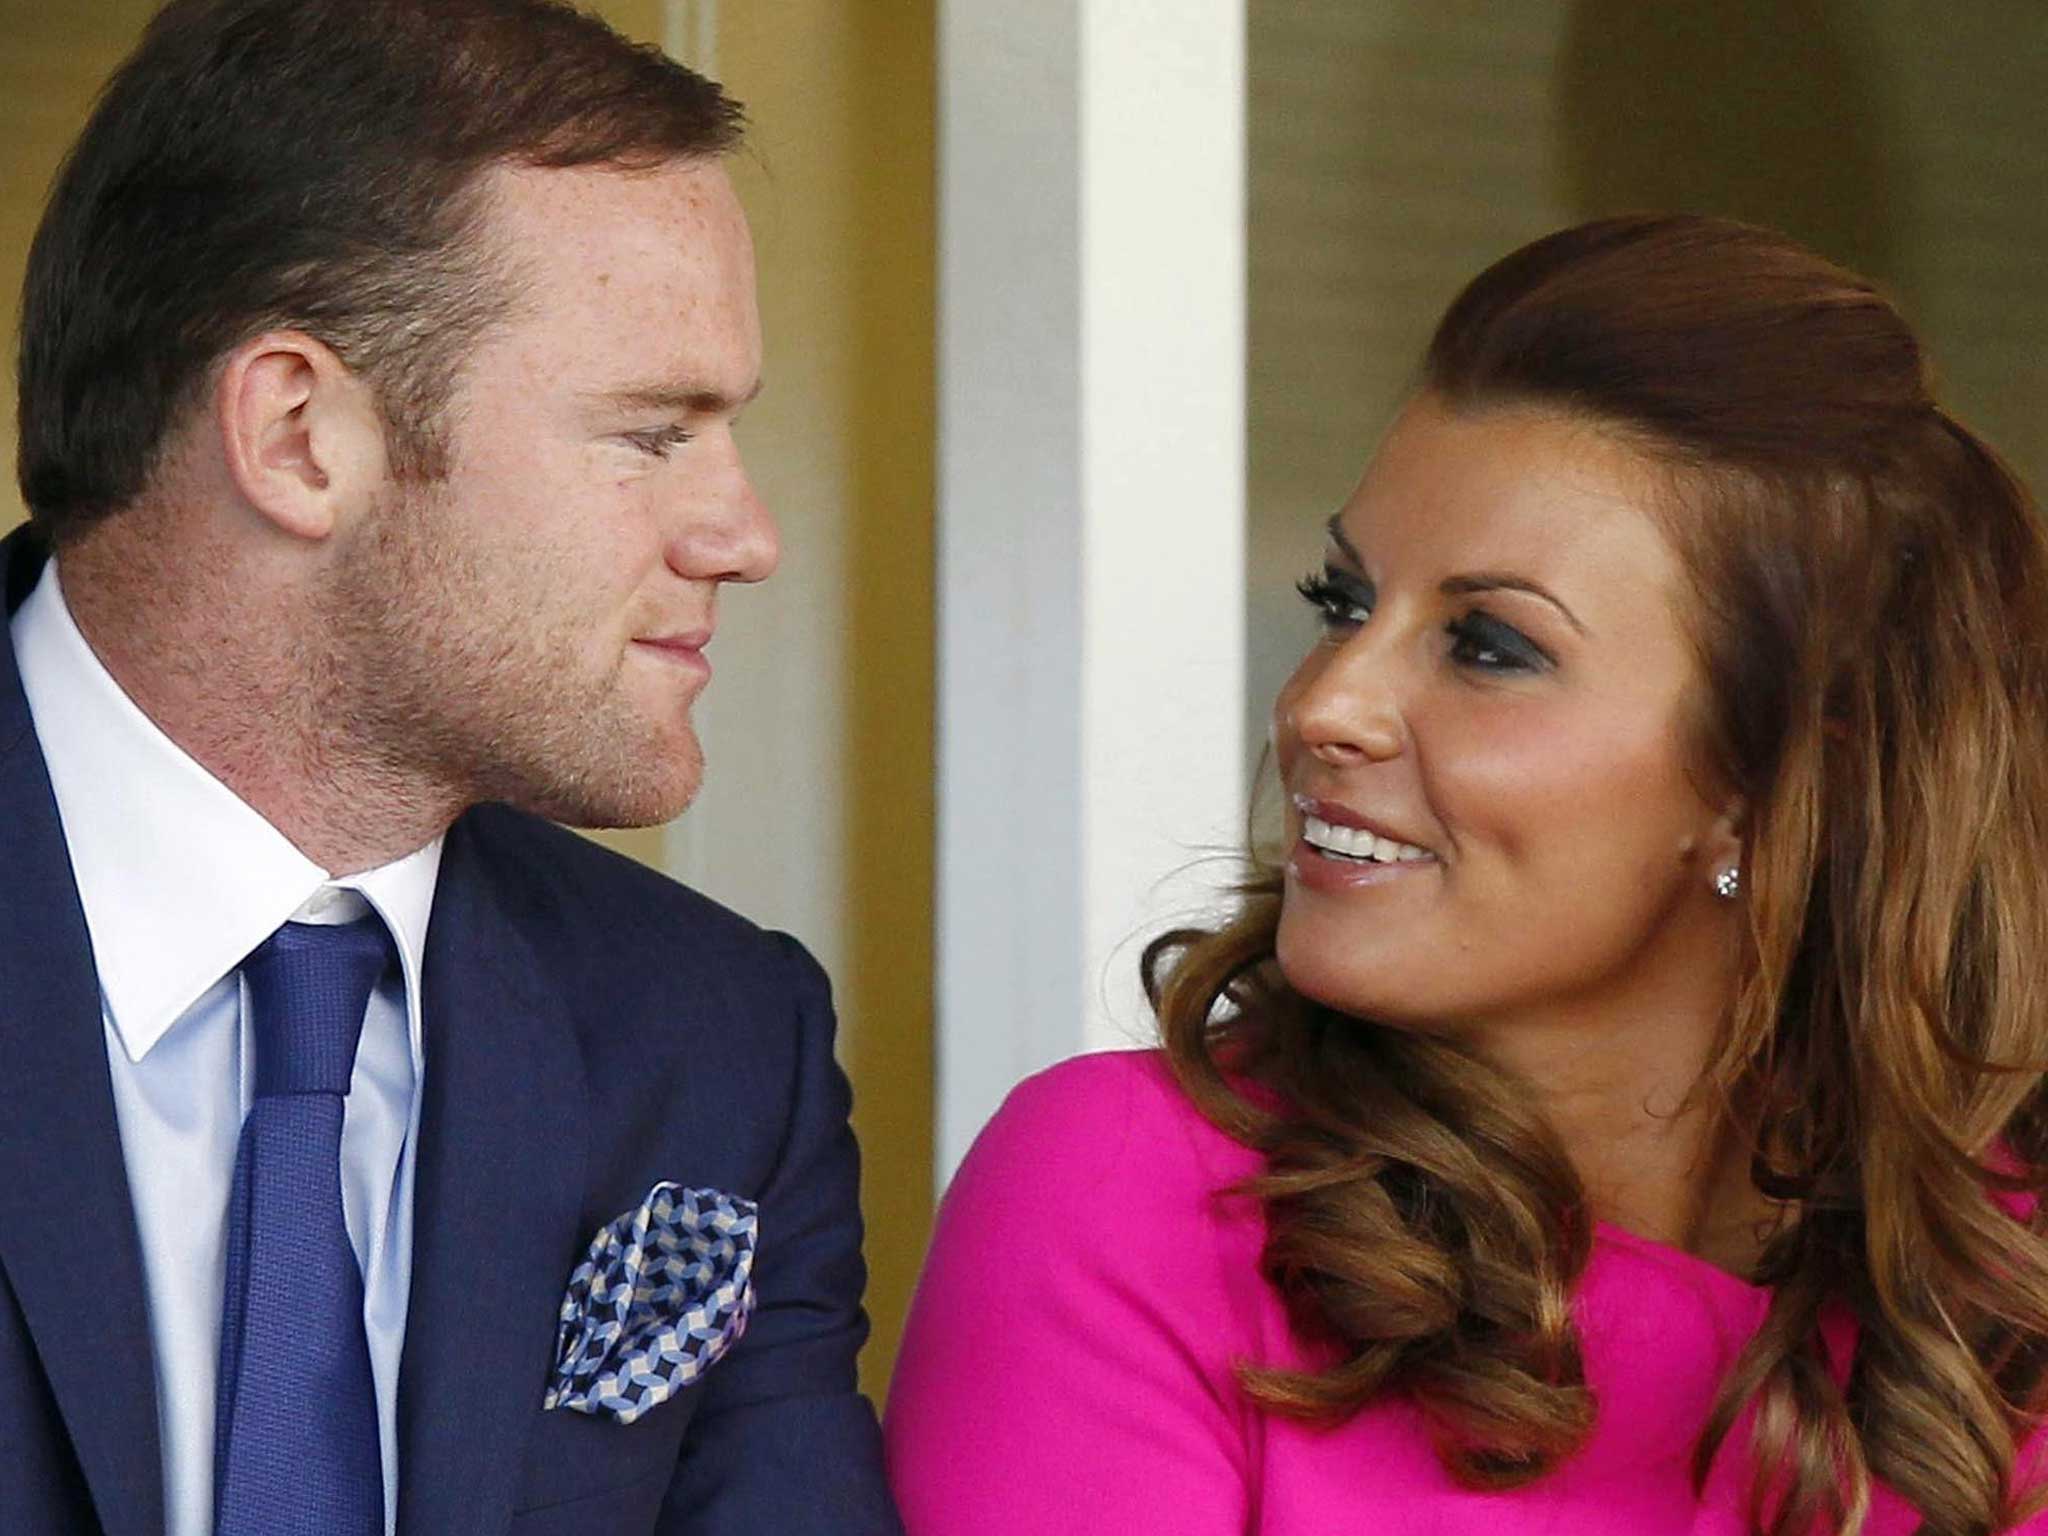 Manchester United star Wayne Rooney and his wife Coleen have had a second son